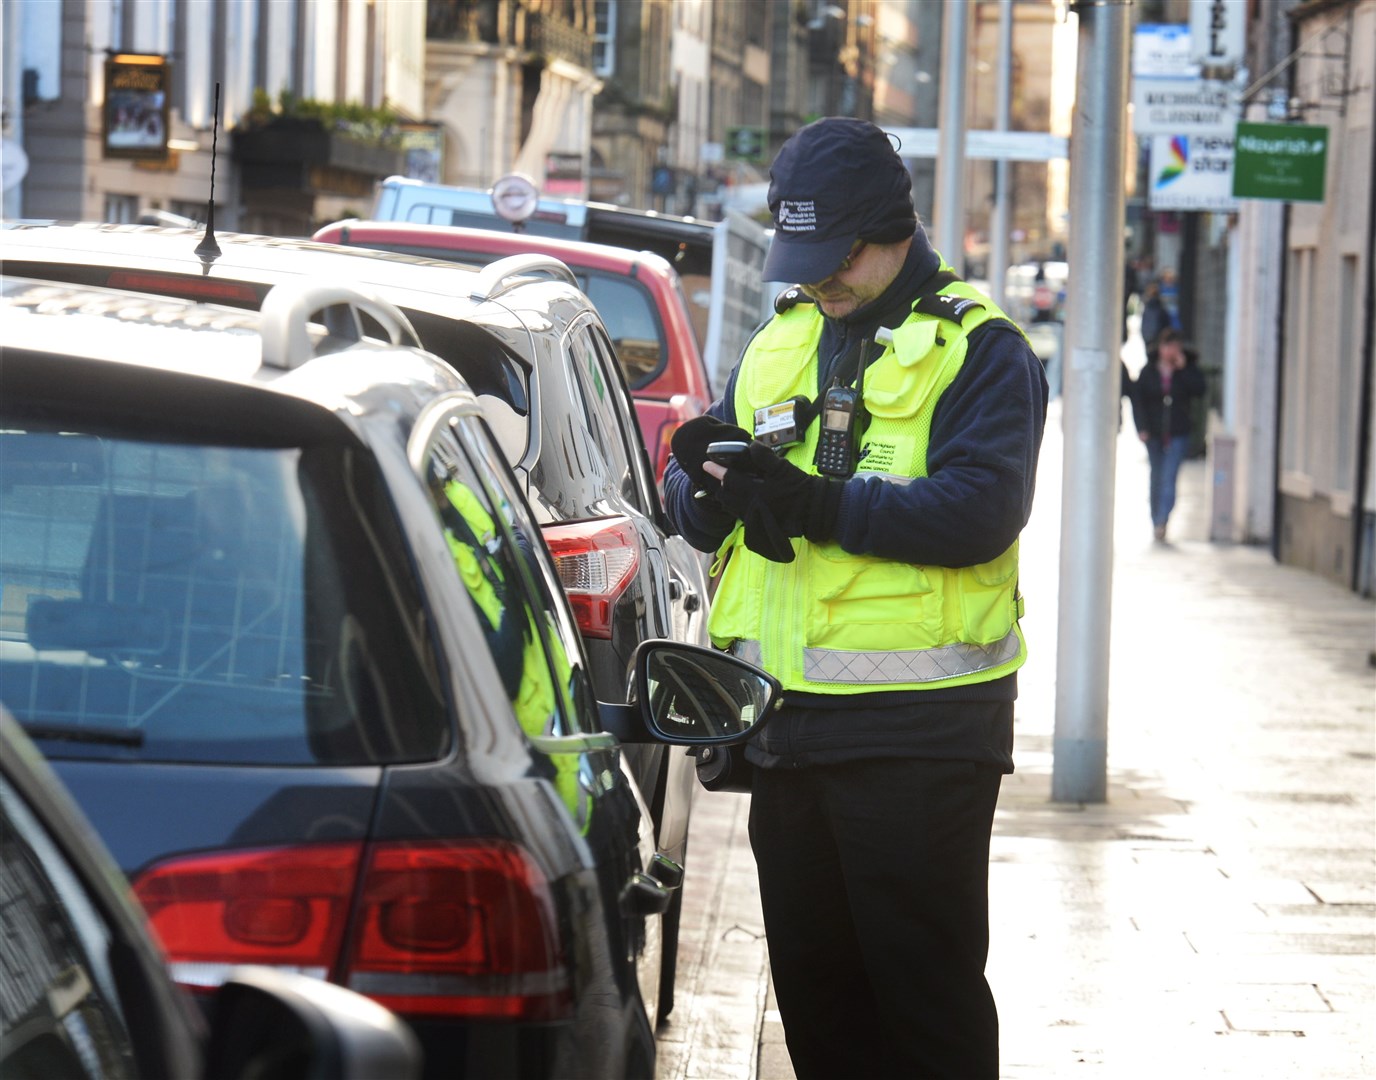 Parking enforcement officers are returning to normal duties from today.